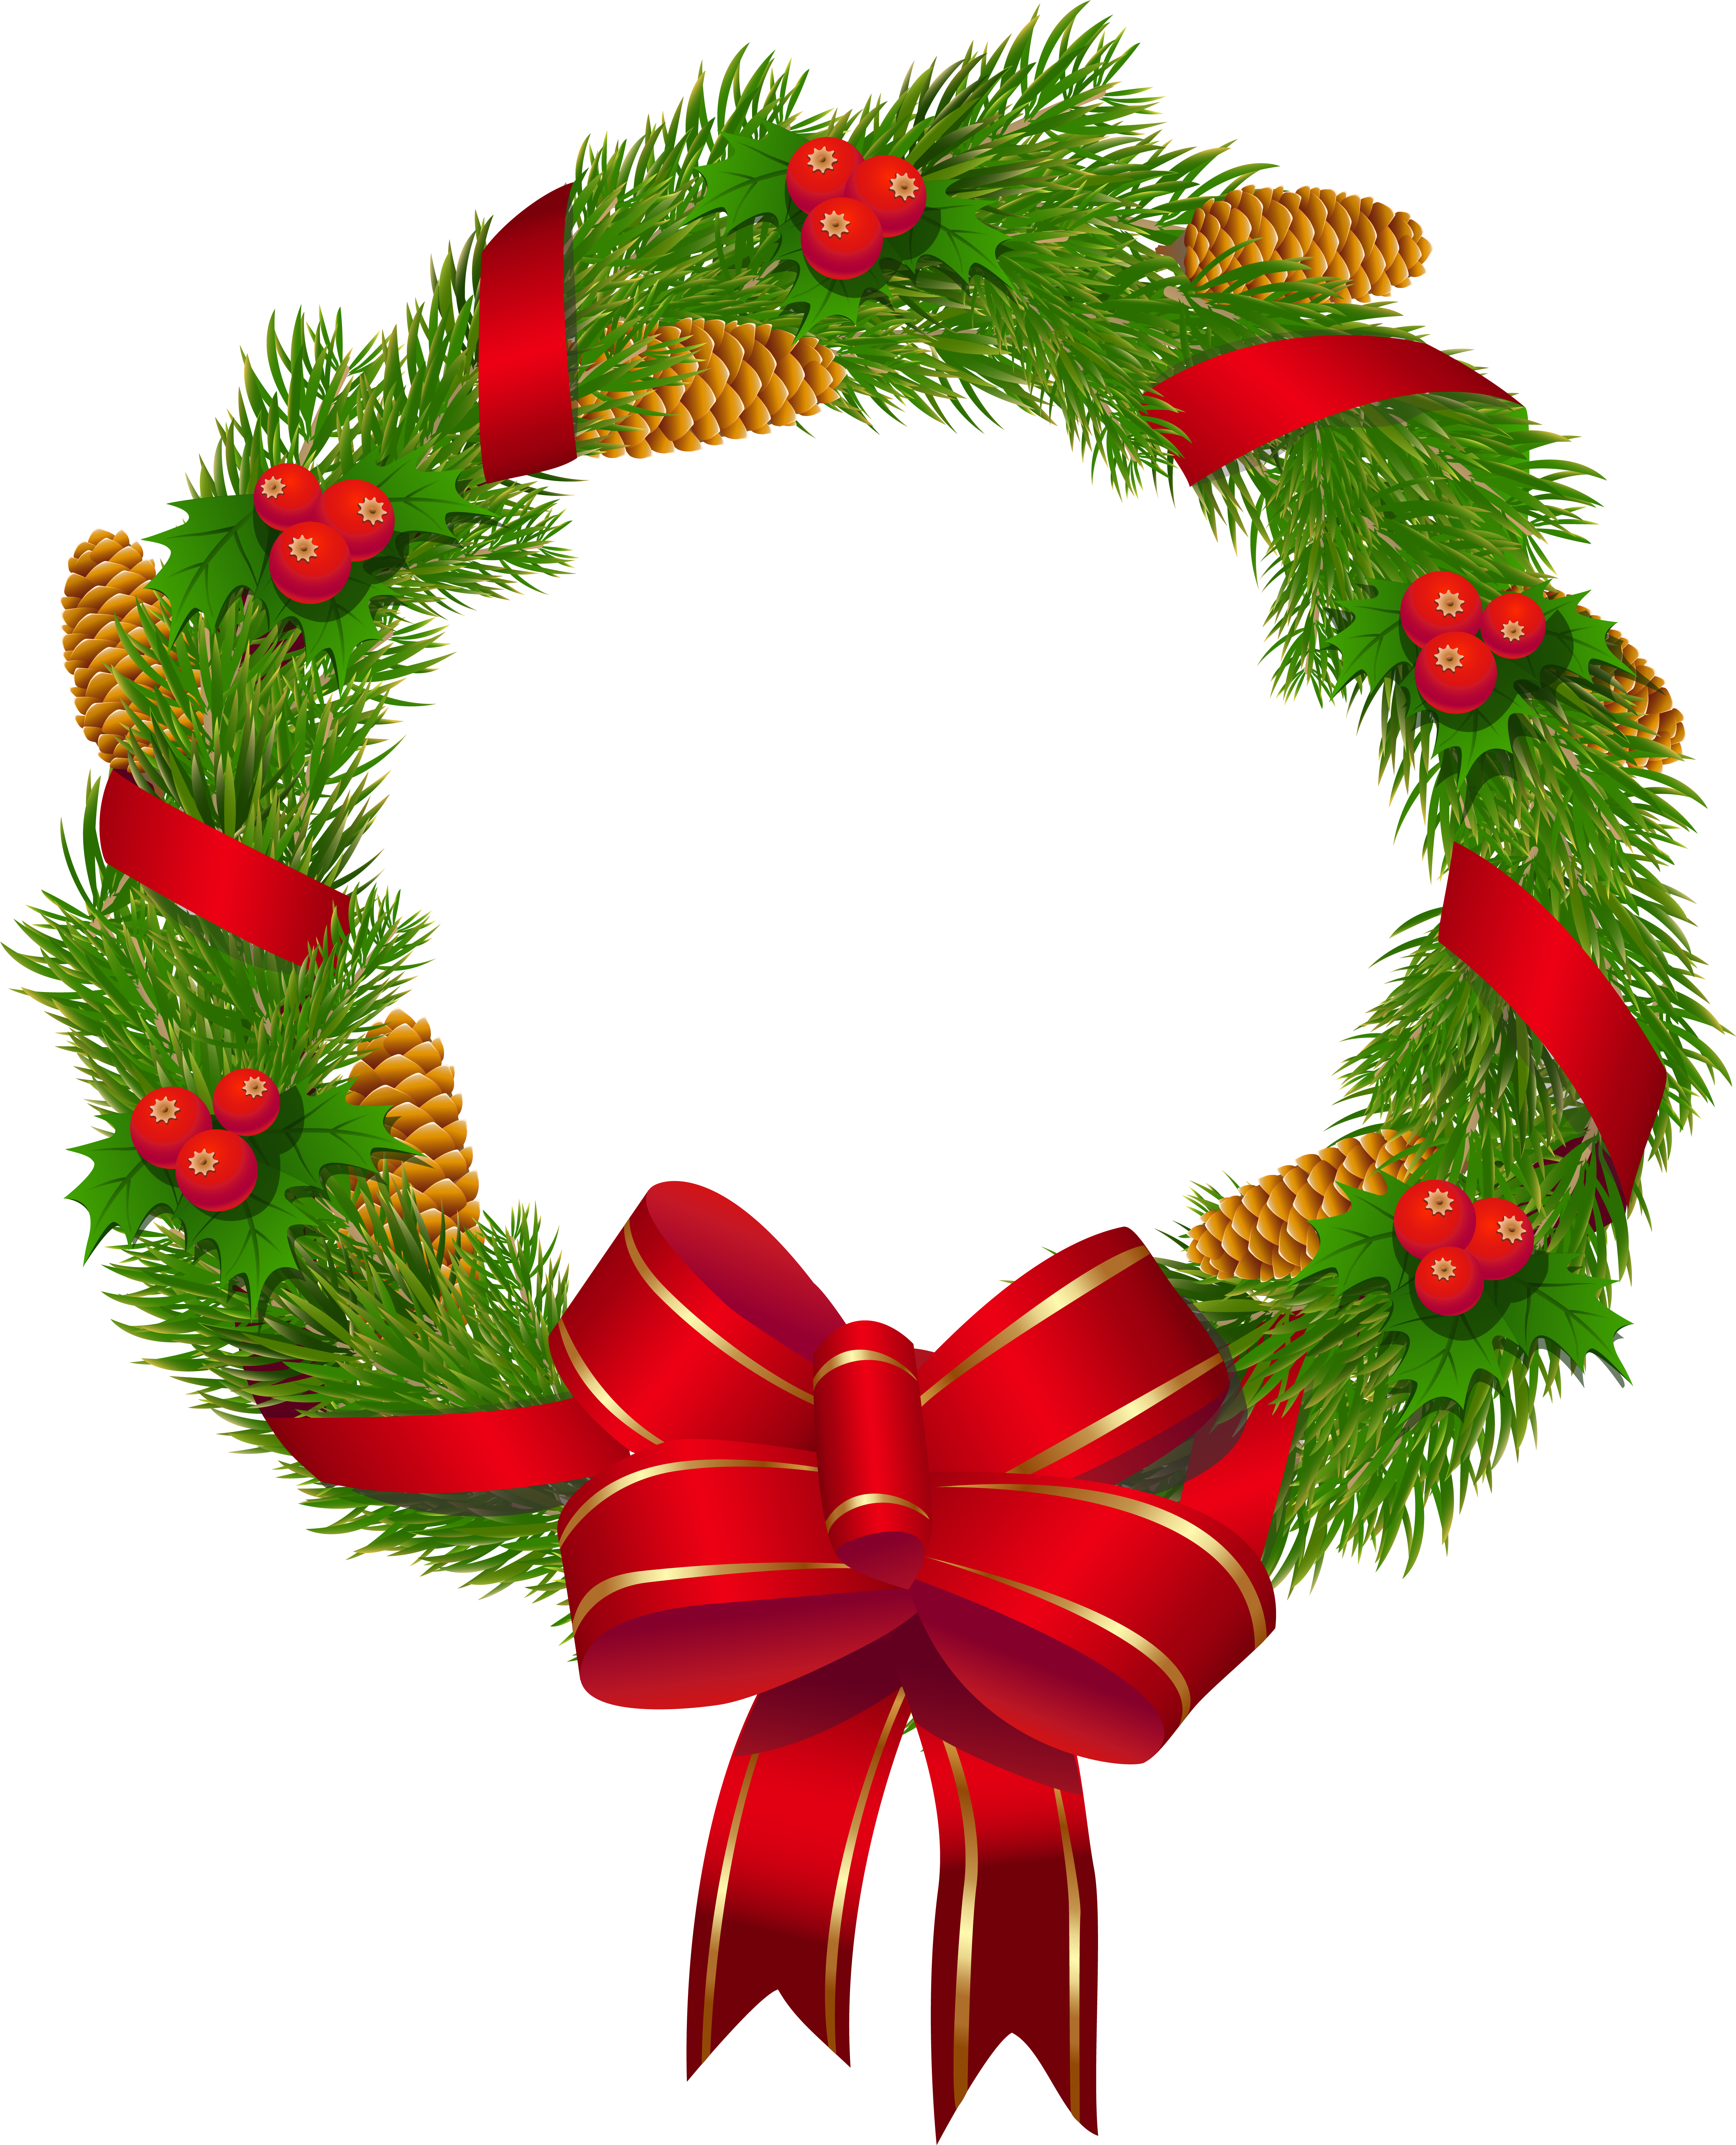 Christmas Pine Wreath With Red Bow Png Clipart Image - Christmas .png (5145x6355)